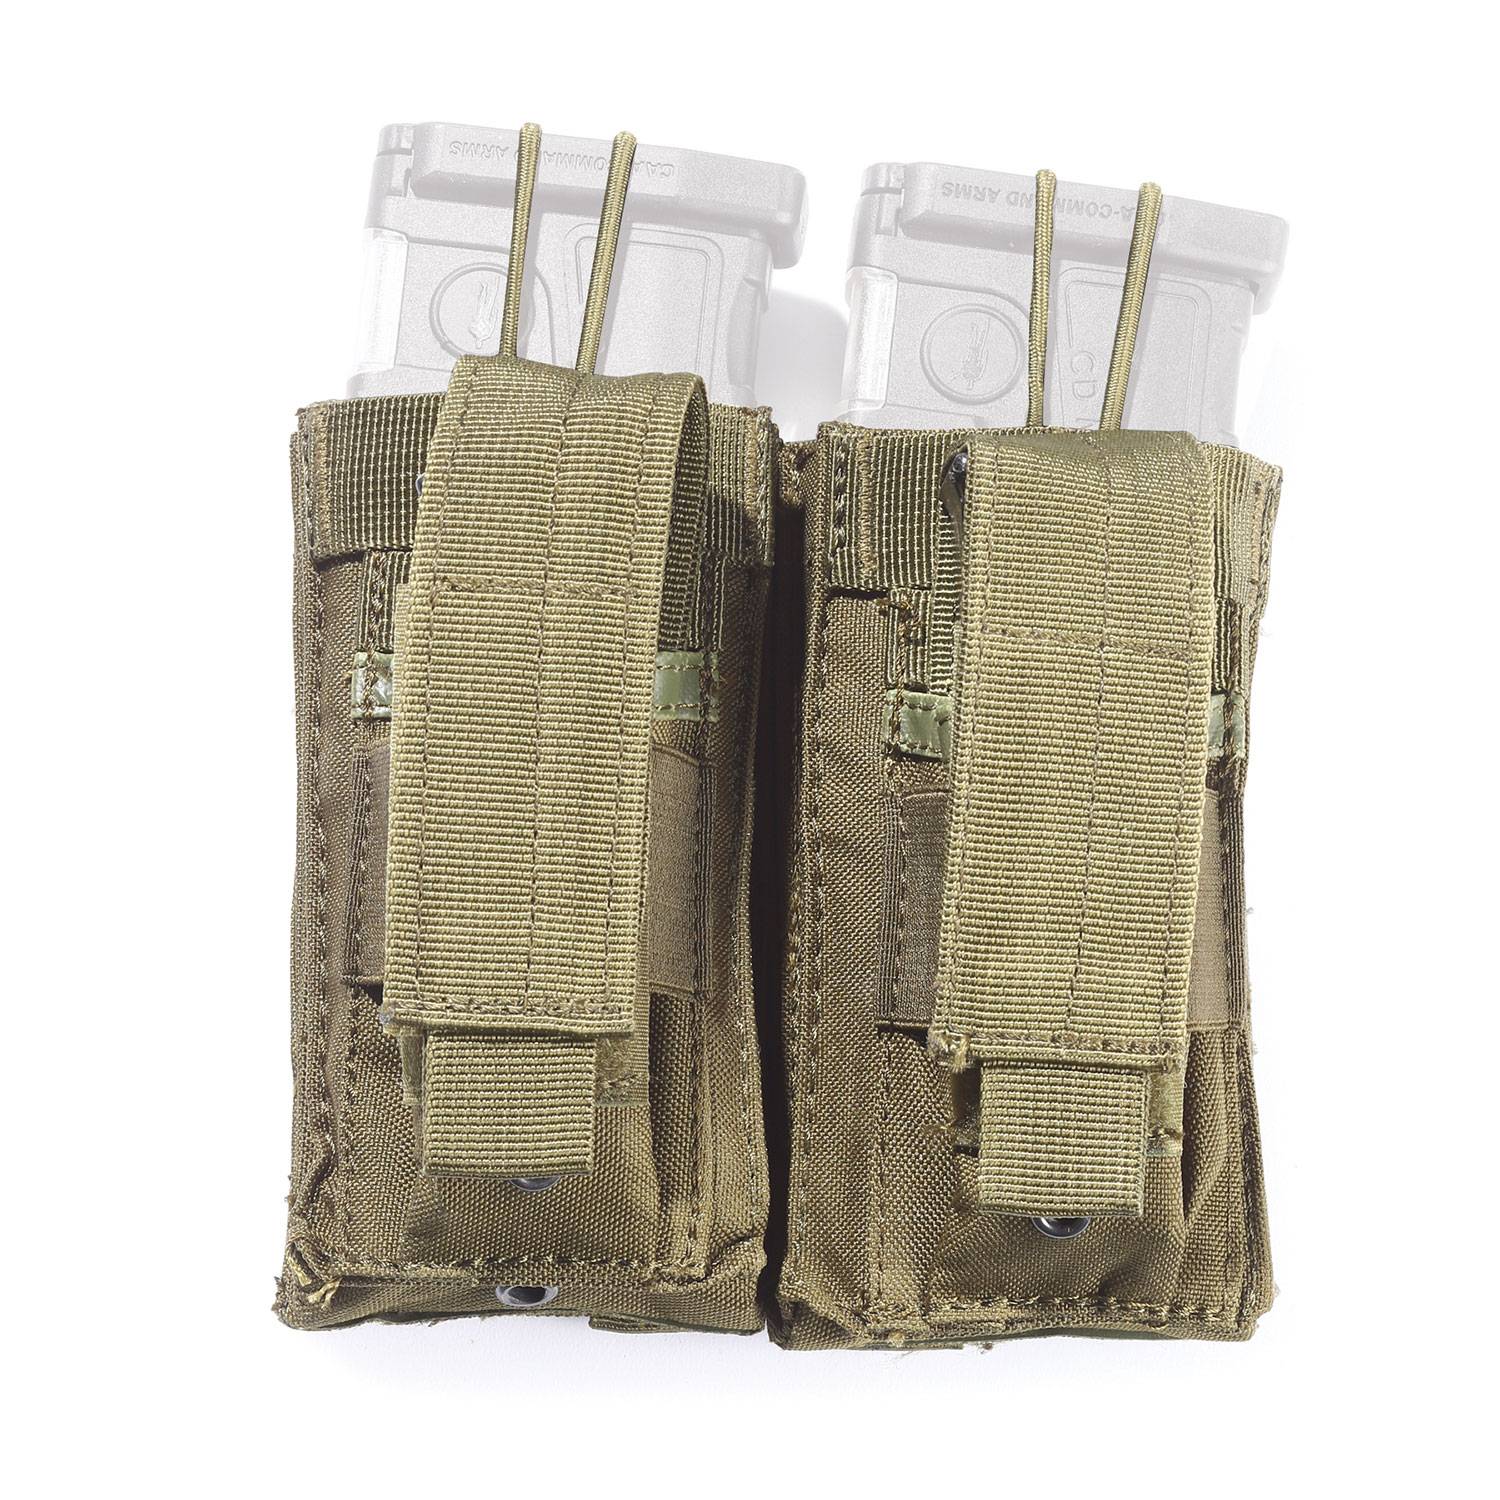 5IVE STAR GEAR DOUBLE OPEN TOP M4/M16 MAG POUCH